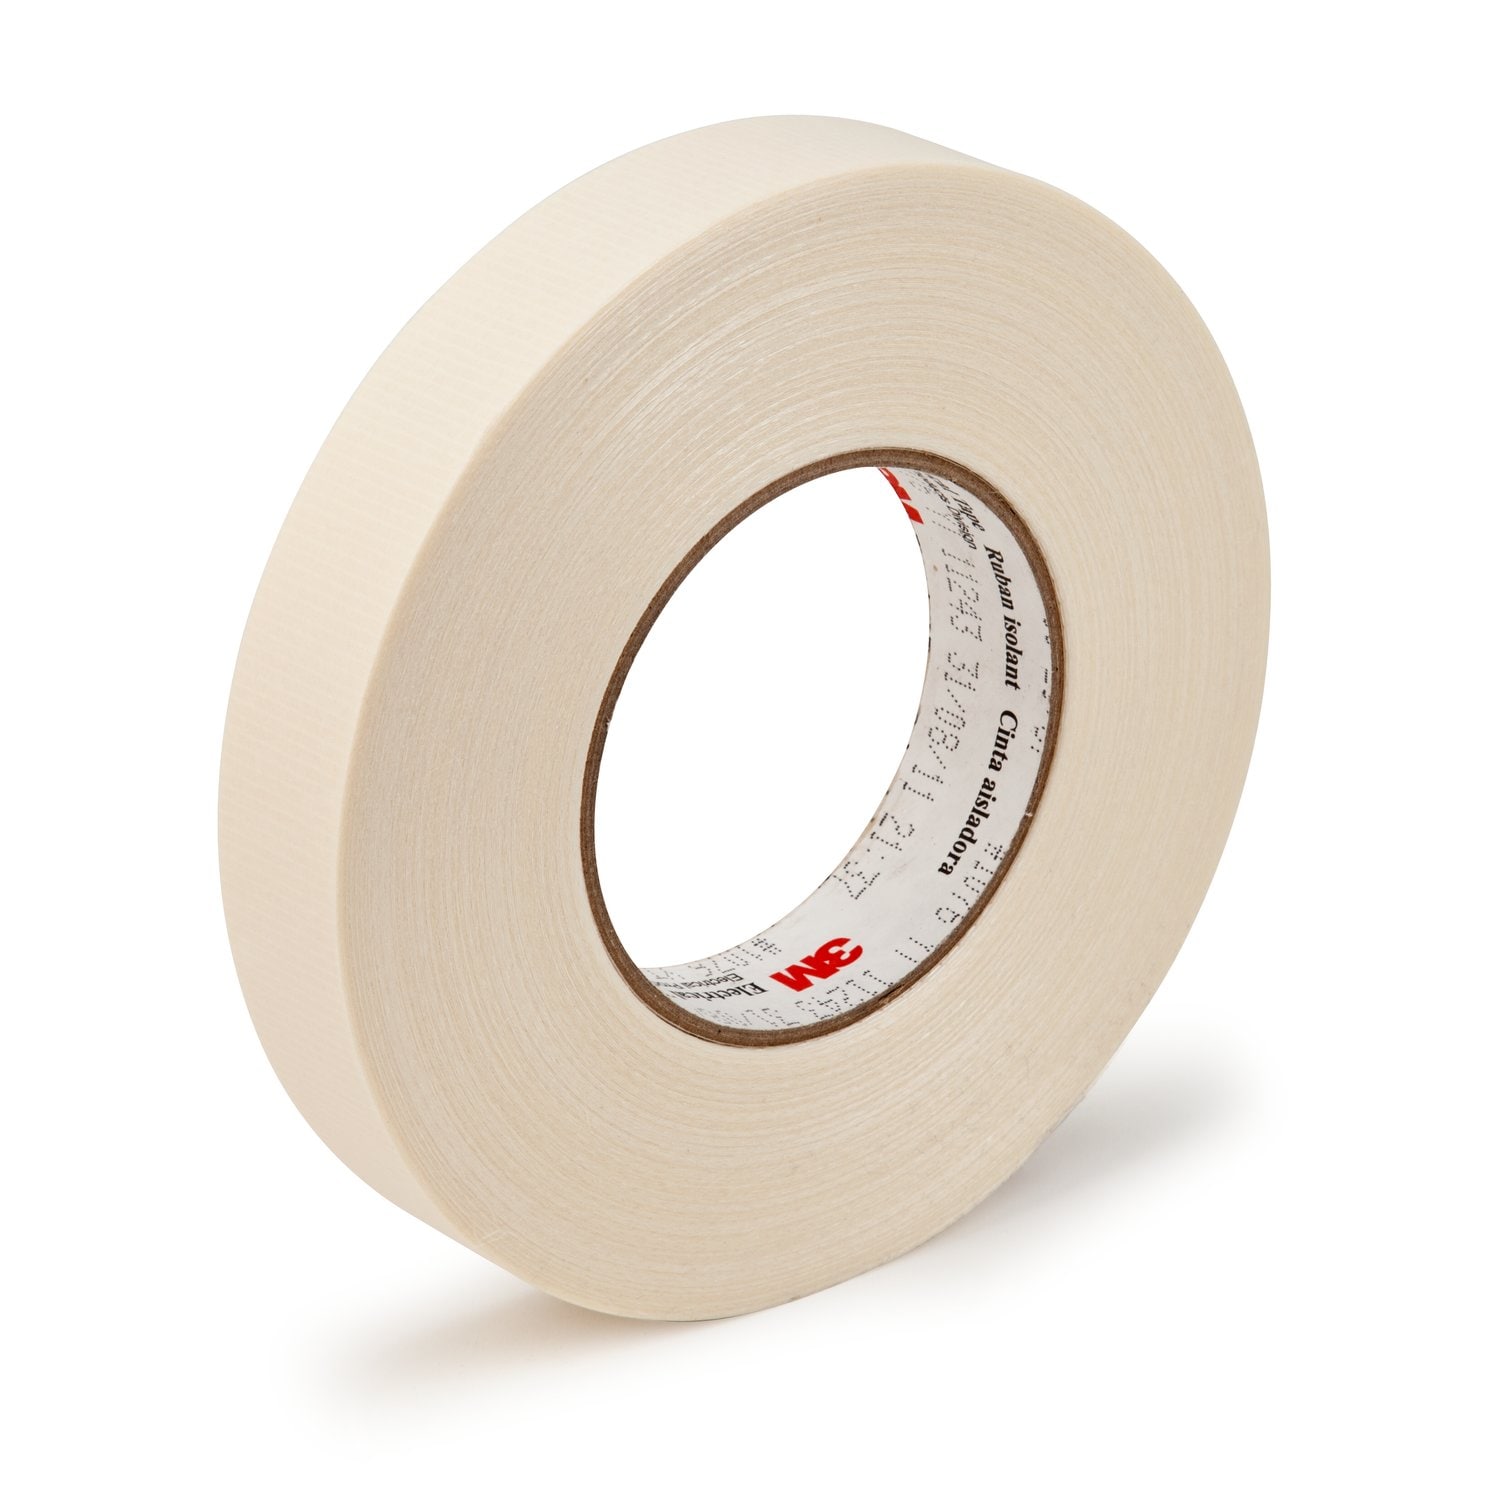 Glue Point 10mm, 2 Sided Adhesive Tape for Crafts 120 pcs - Clear